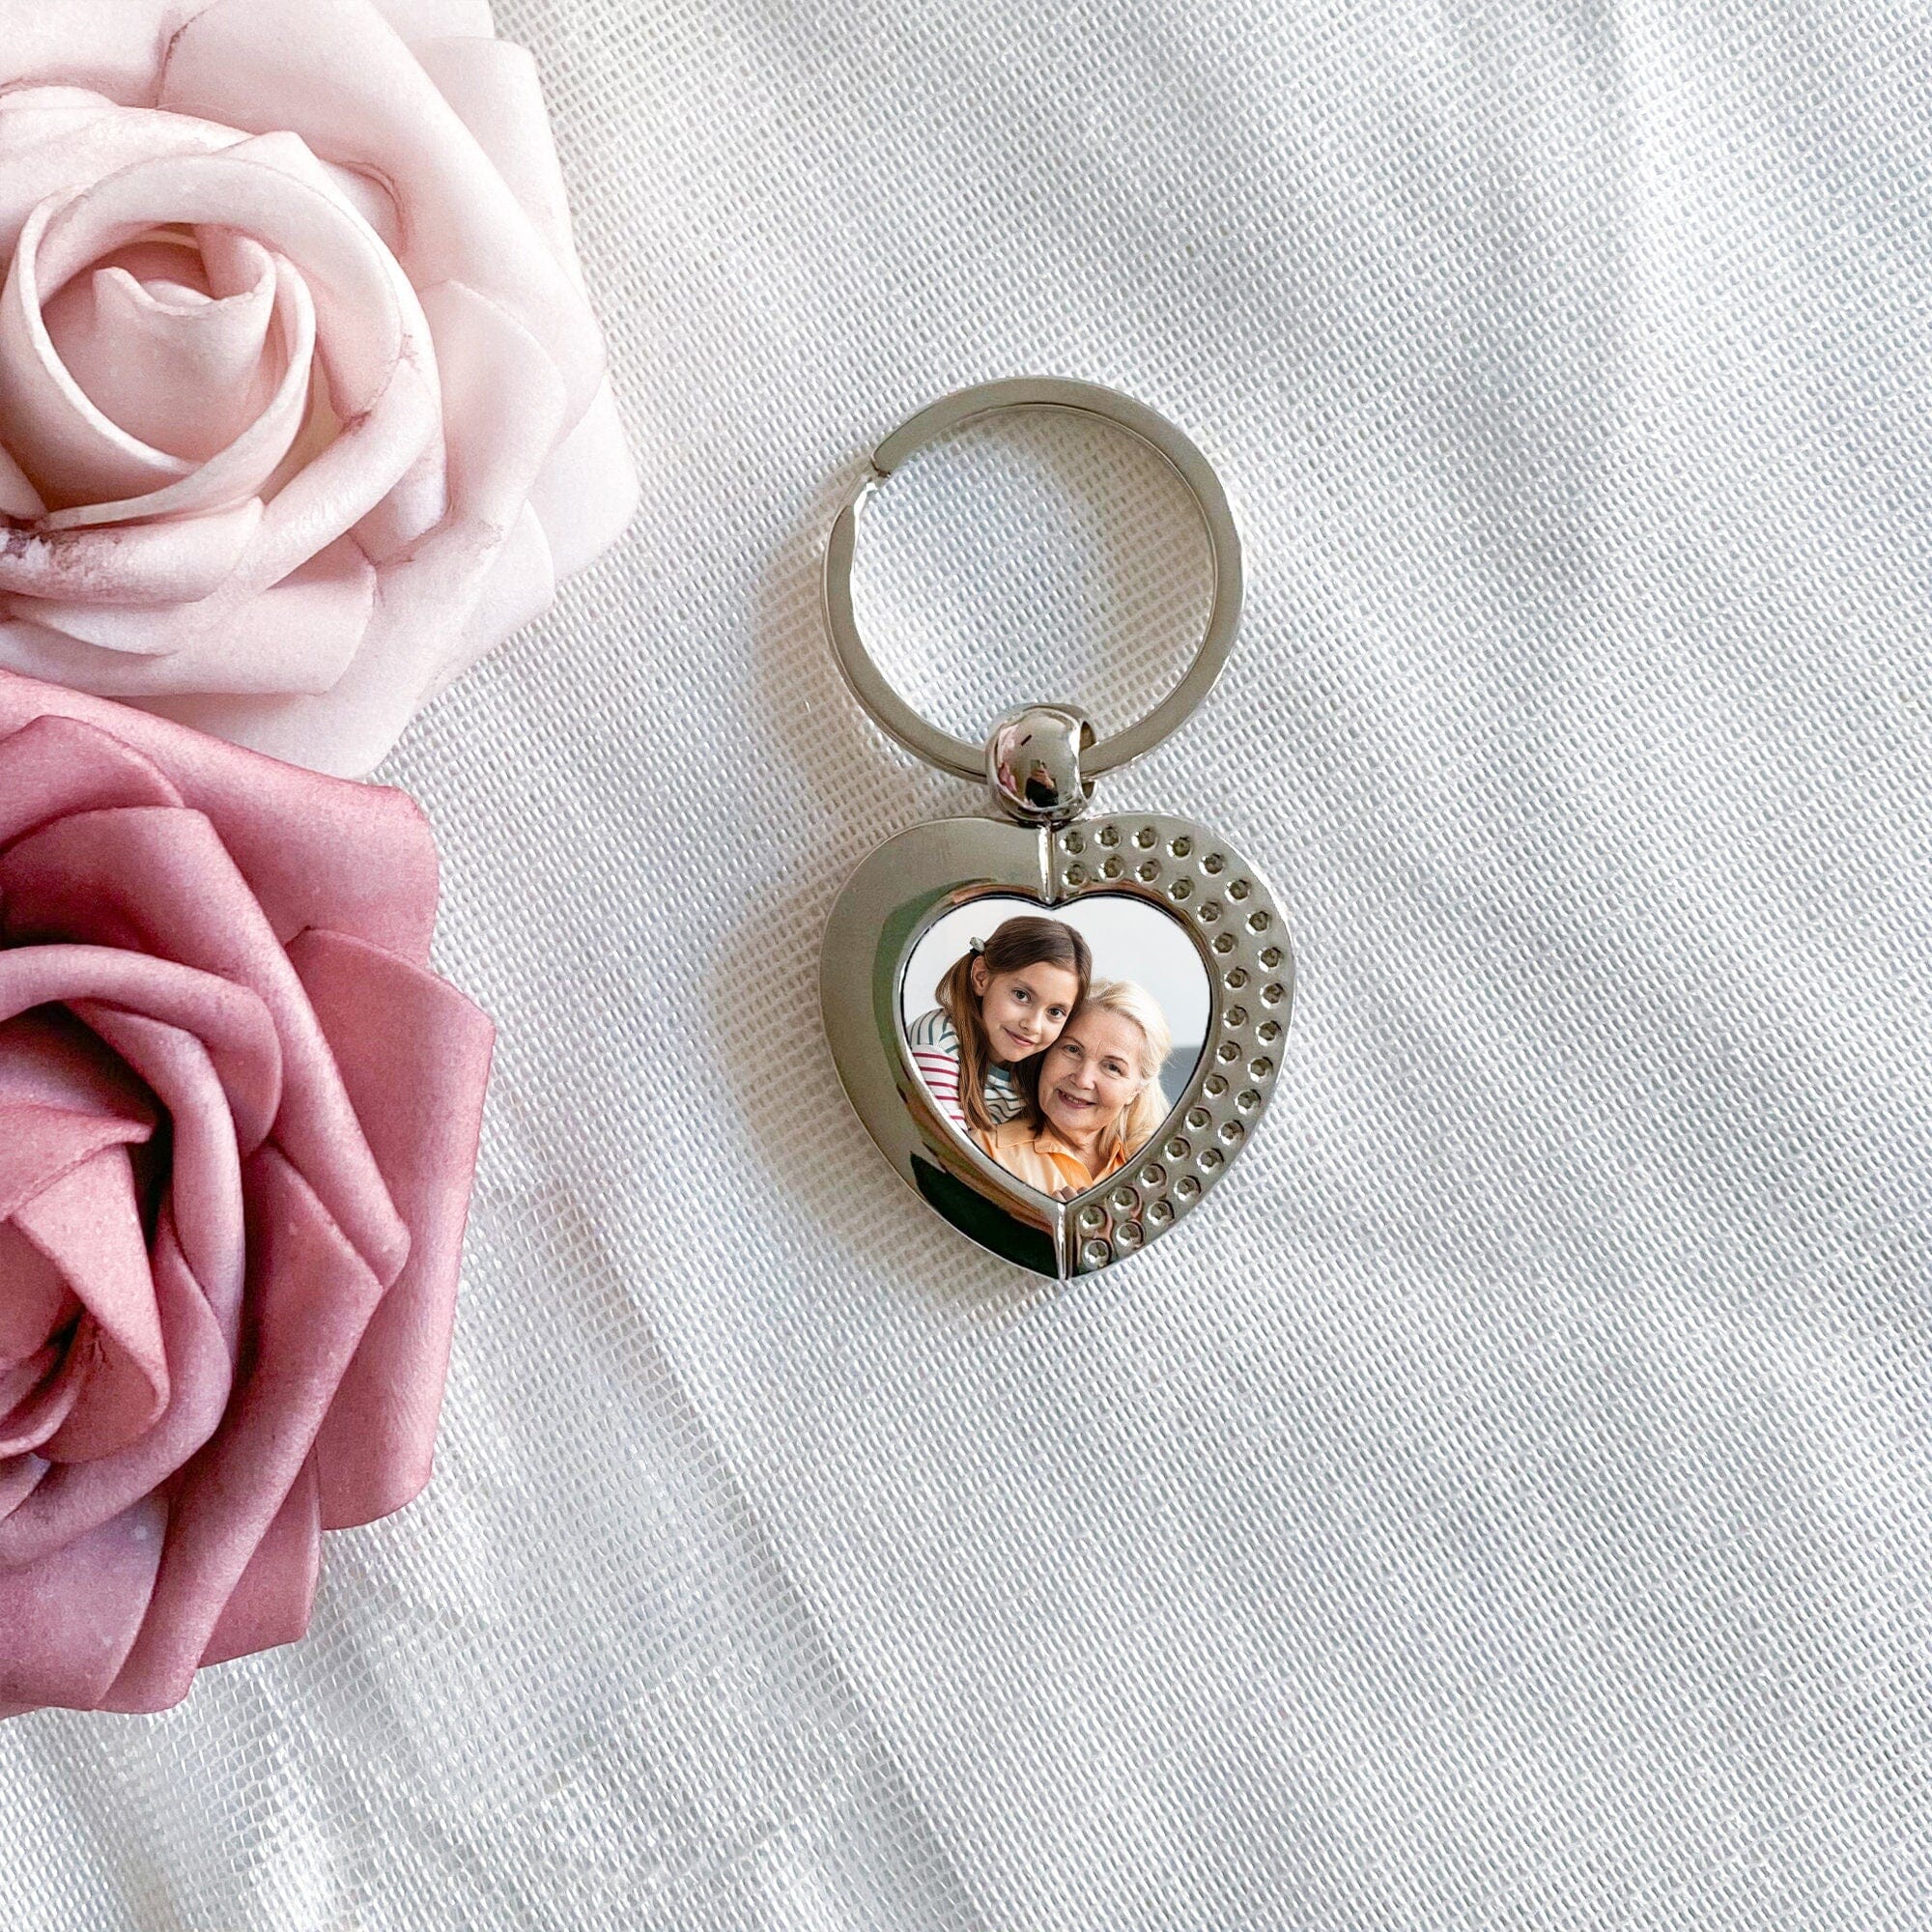 Photo Keyring, Photograph Keychain, Christmas Birthday Mother's Day Father's Day Gift